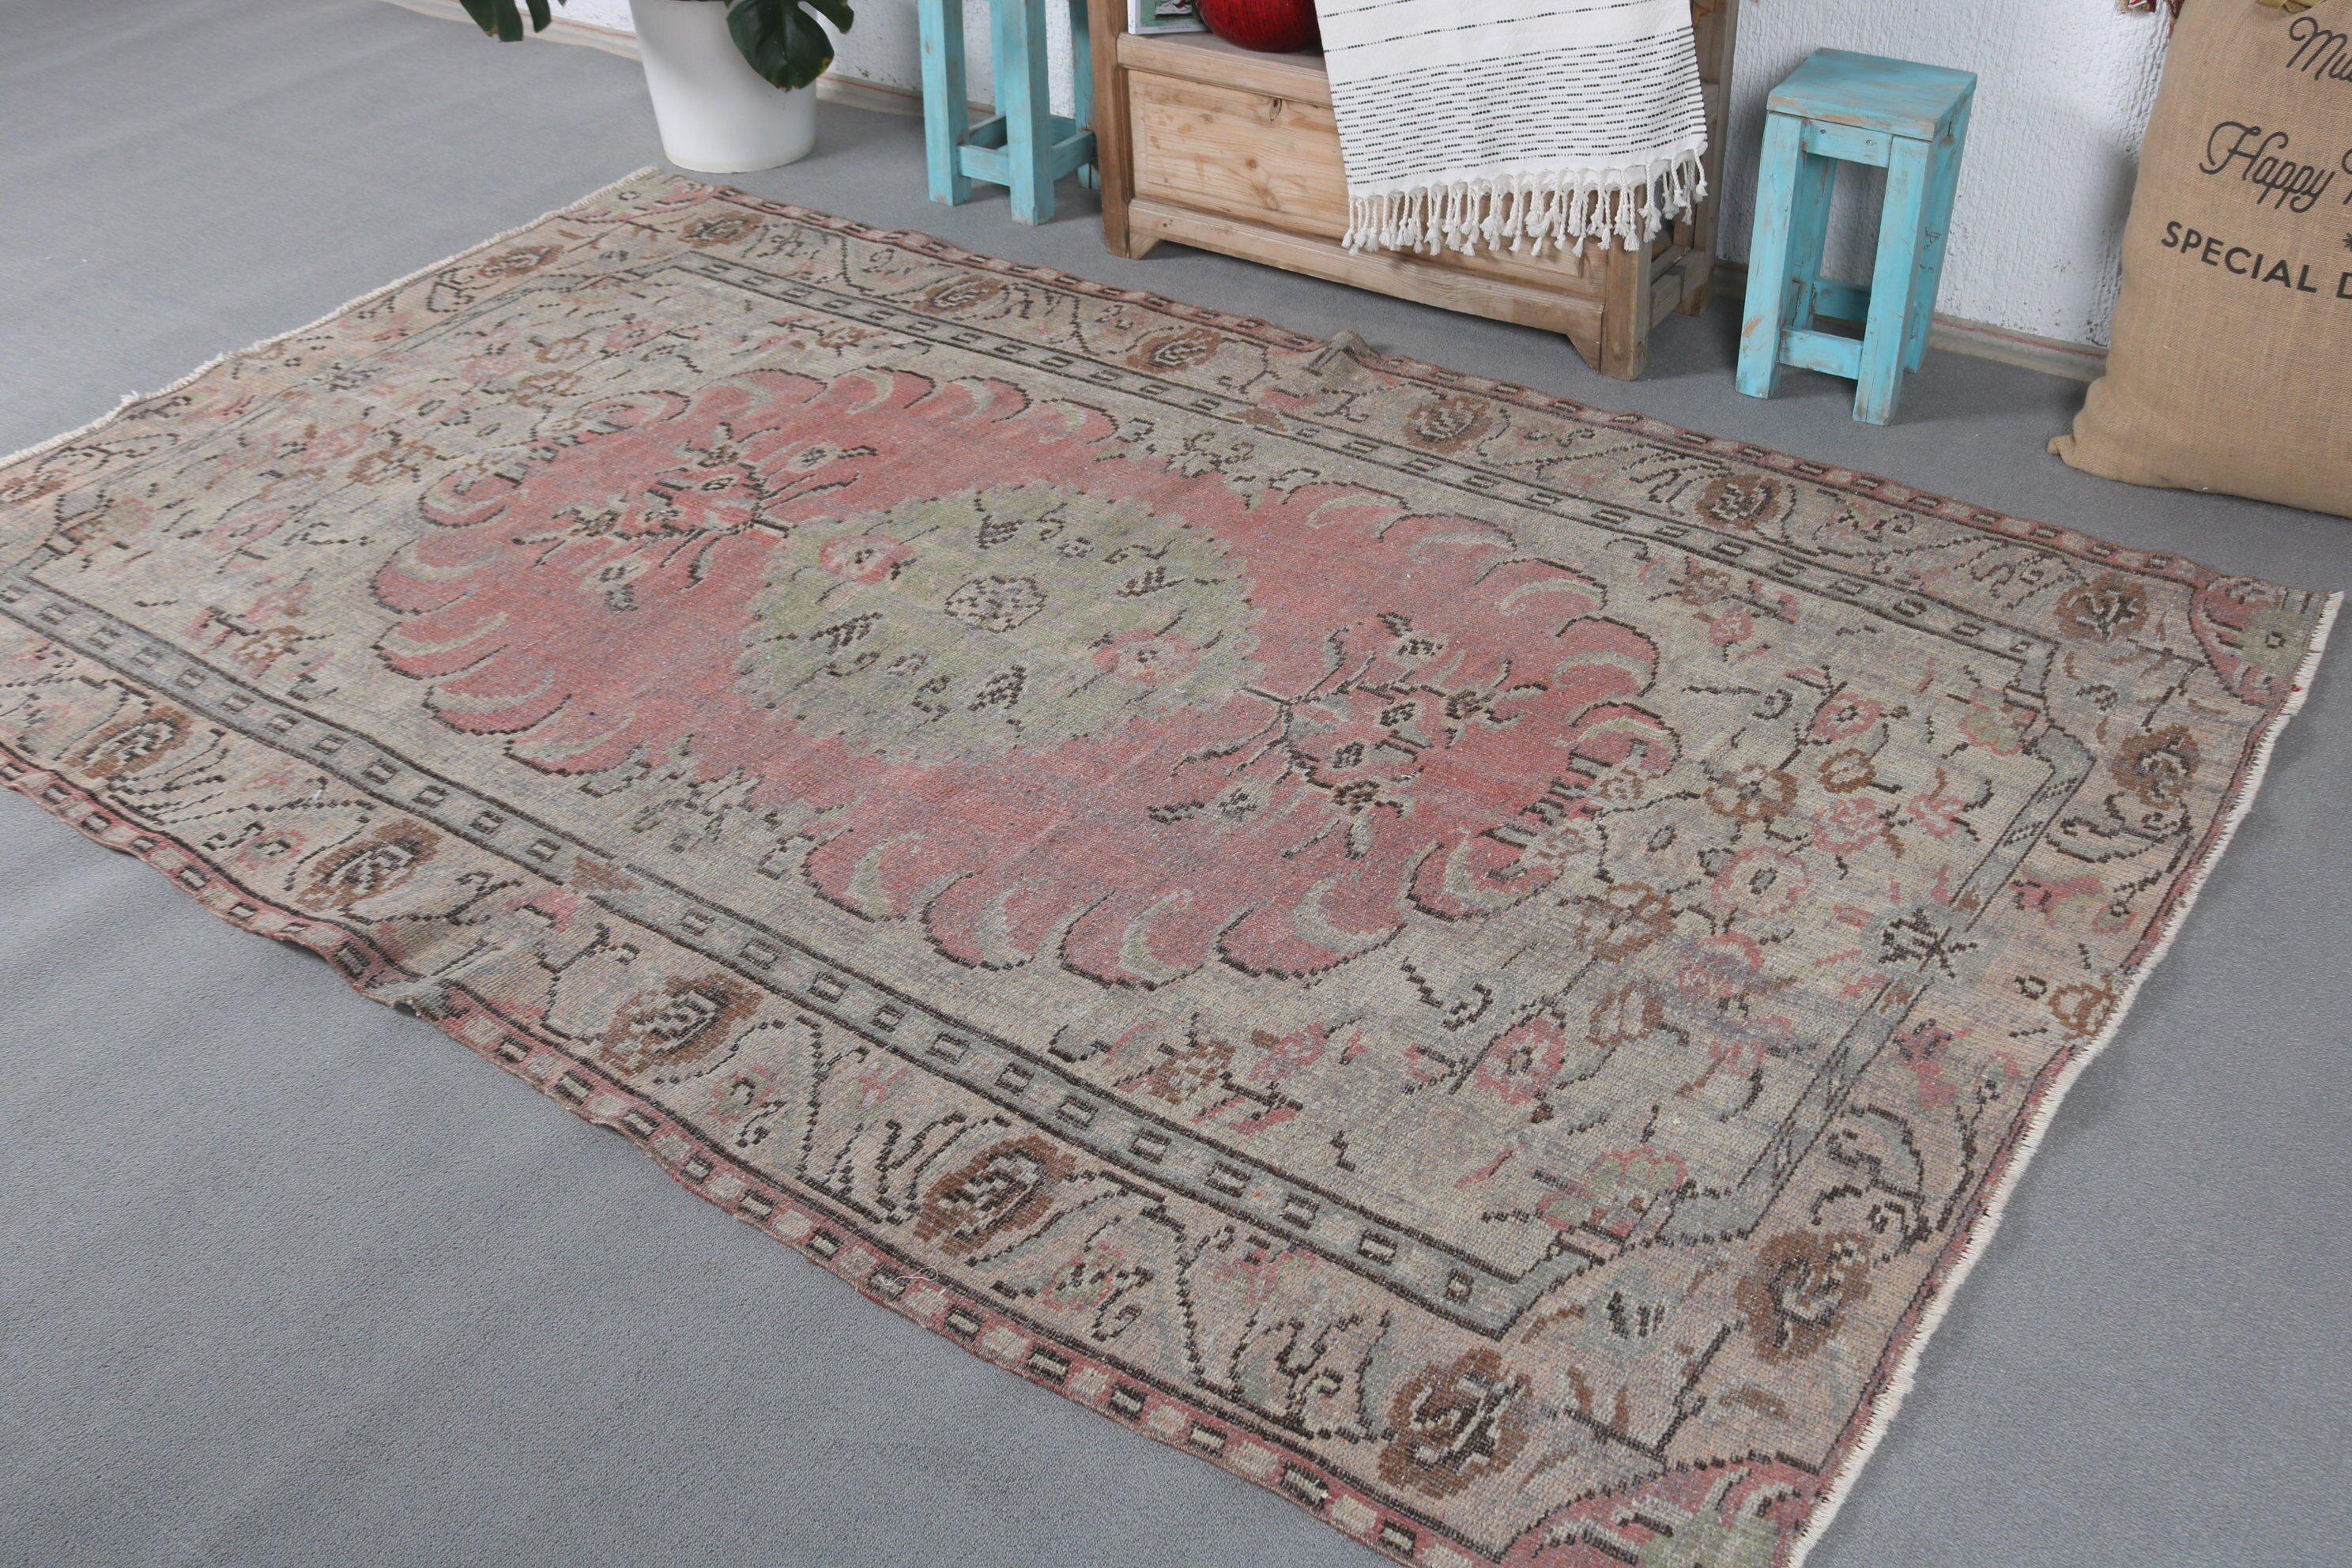 Oushak Rug, 5x7.9 ft Area Rugs, Rugs for Area, Turkish Rug, Cool Rug, Dining Room Rugs, Indoor Rug, Vintage Rug, Pink Moroccan Rugs